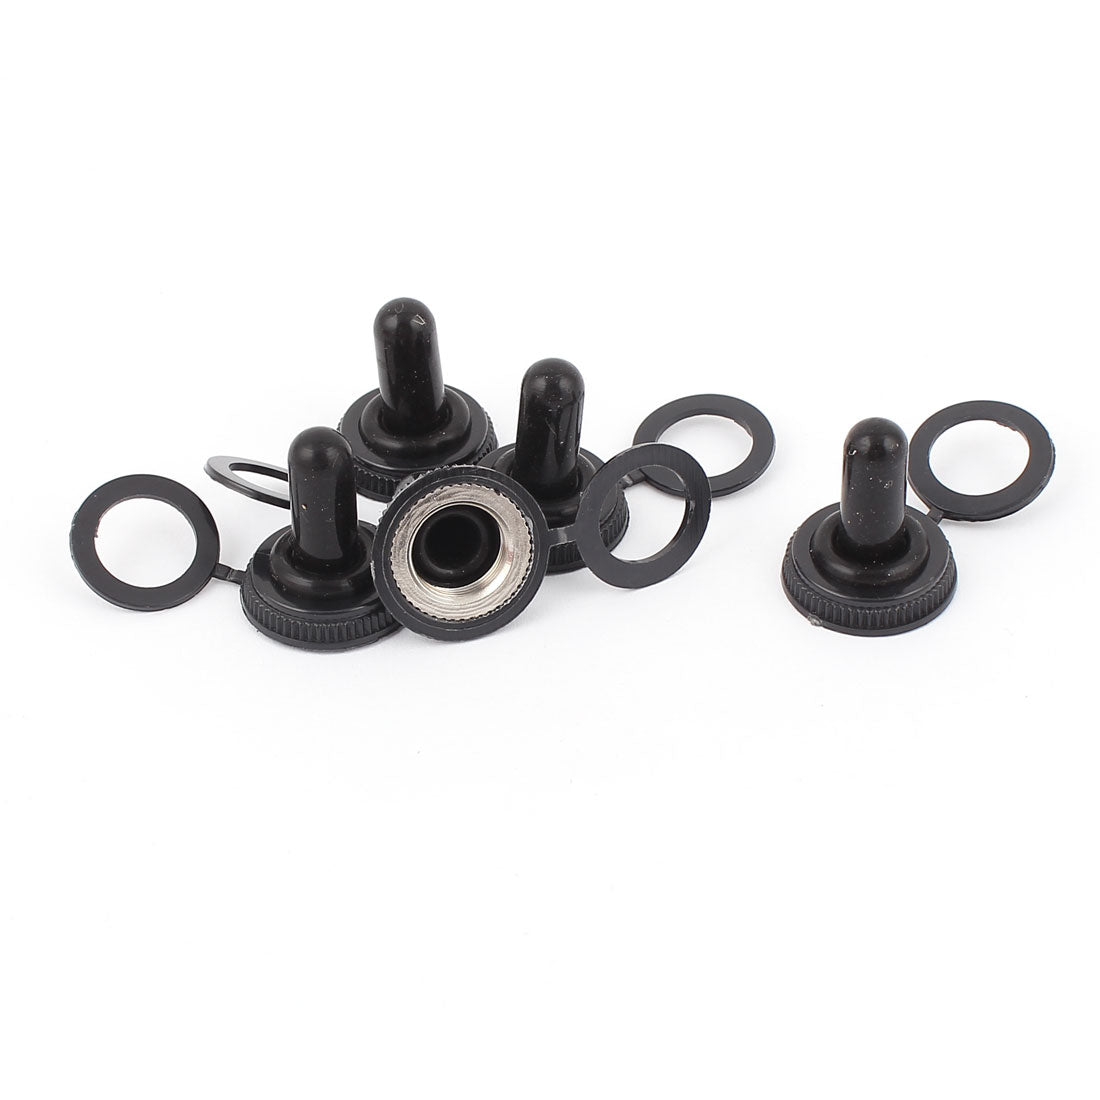 uxcell Uxcell 5Pcs 12mm Mini Toggle Switch Waterproof Rubber Cover Boot Cap Black